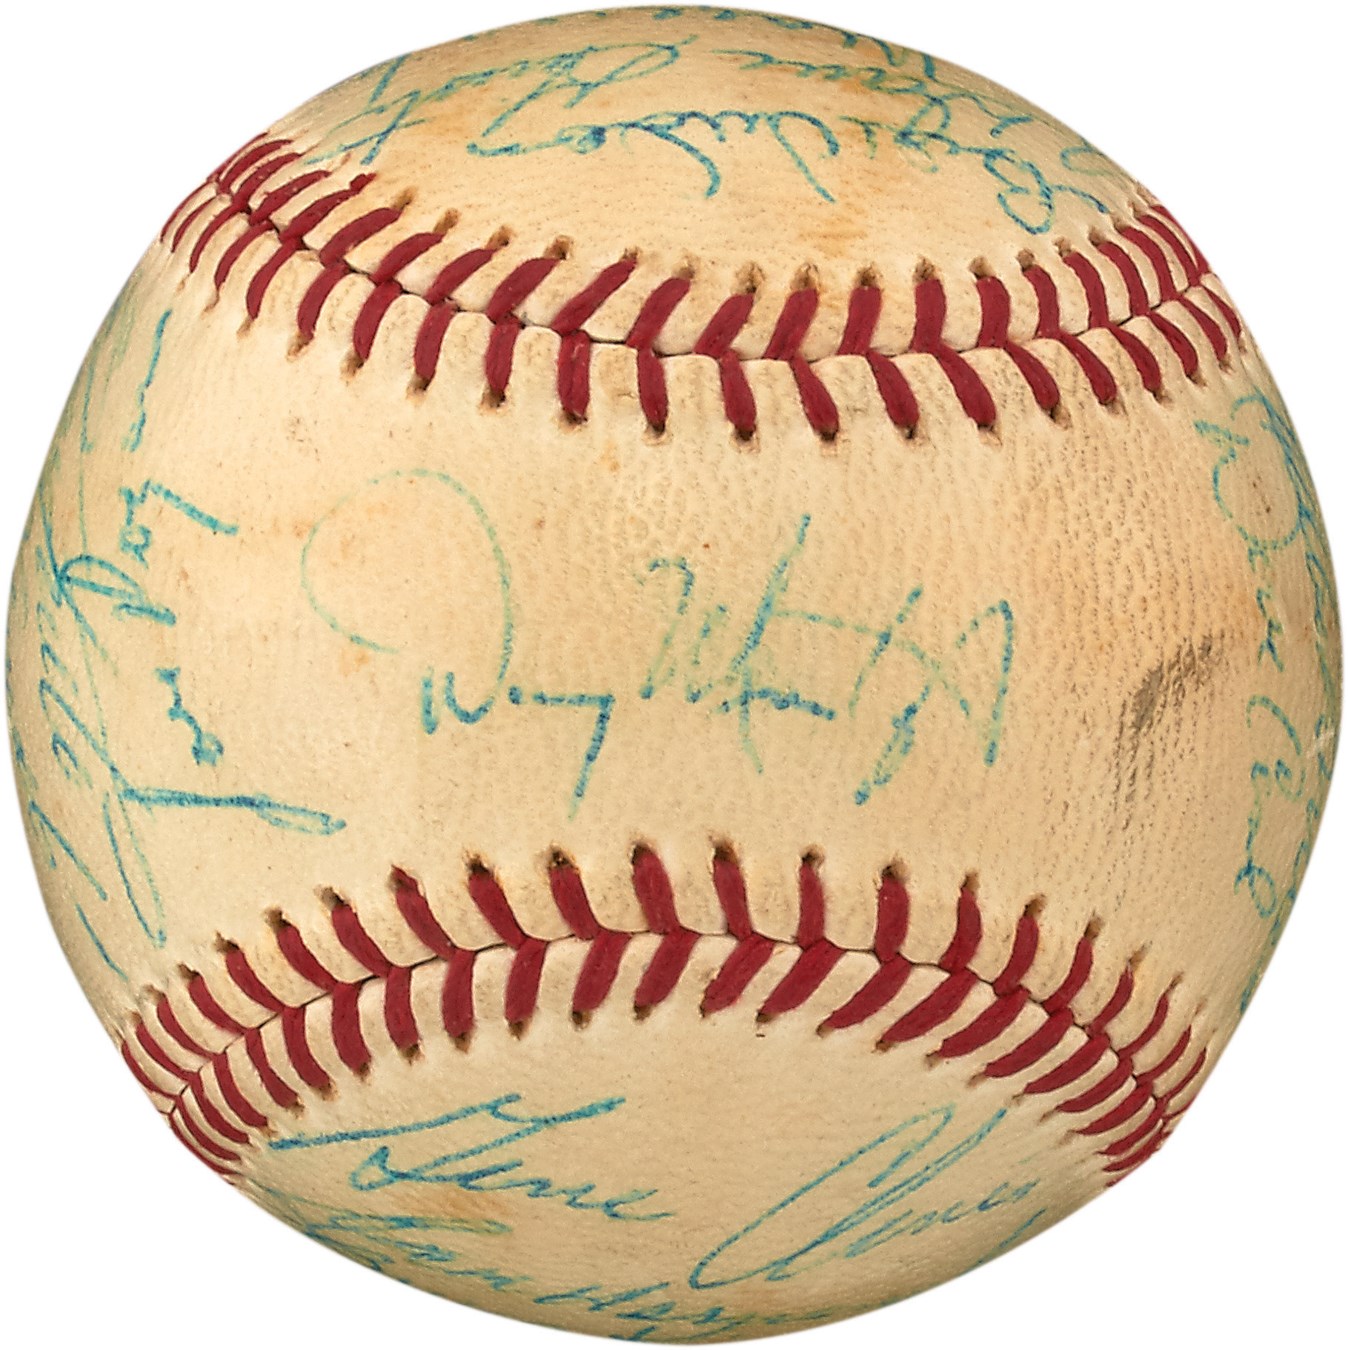 - 1971 World Champion Pittsburgh Pirates Team-Signed Baseball with Clemente (PSA/DNA)